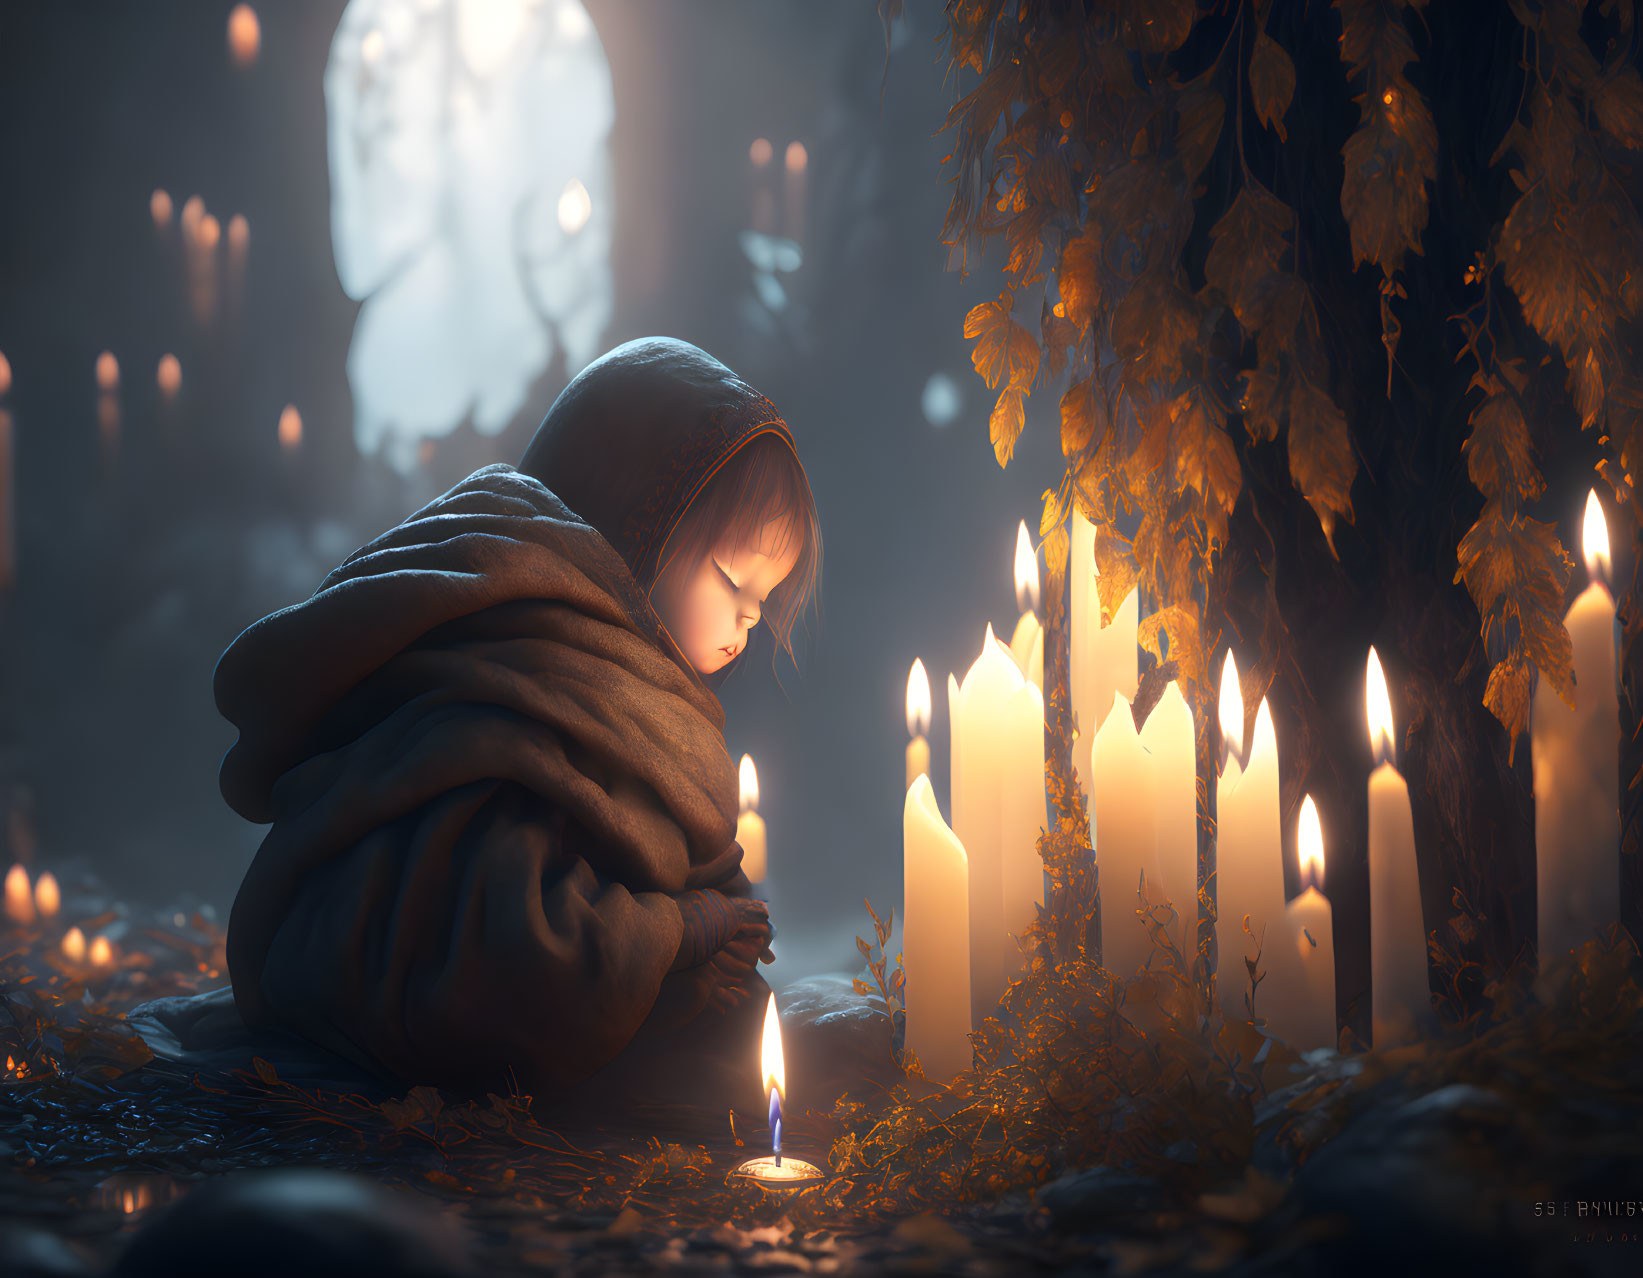 Child in hooded cloak kneels by candle in mystical forest